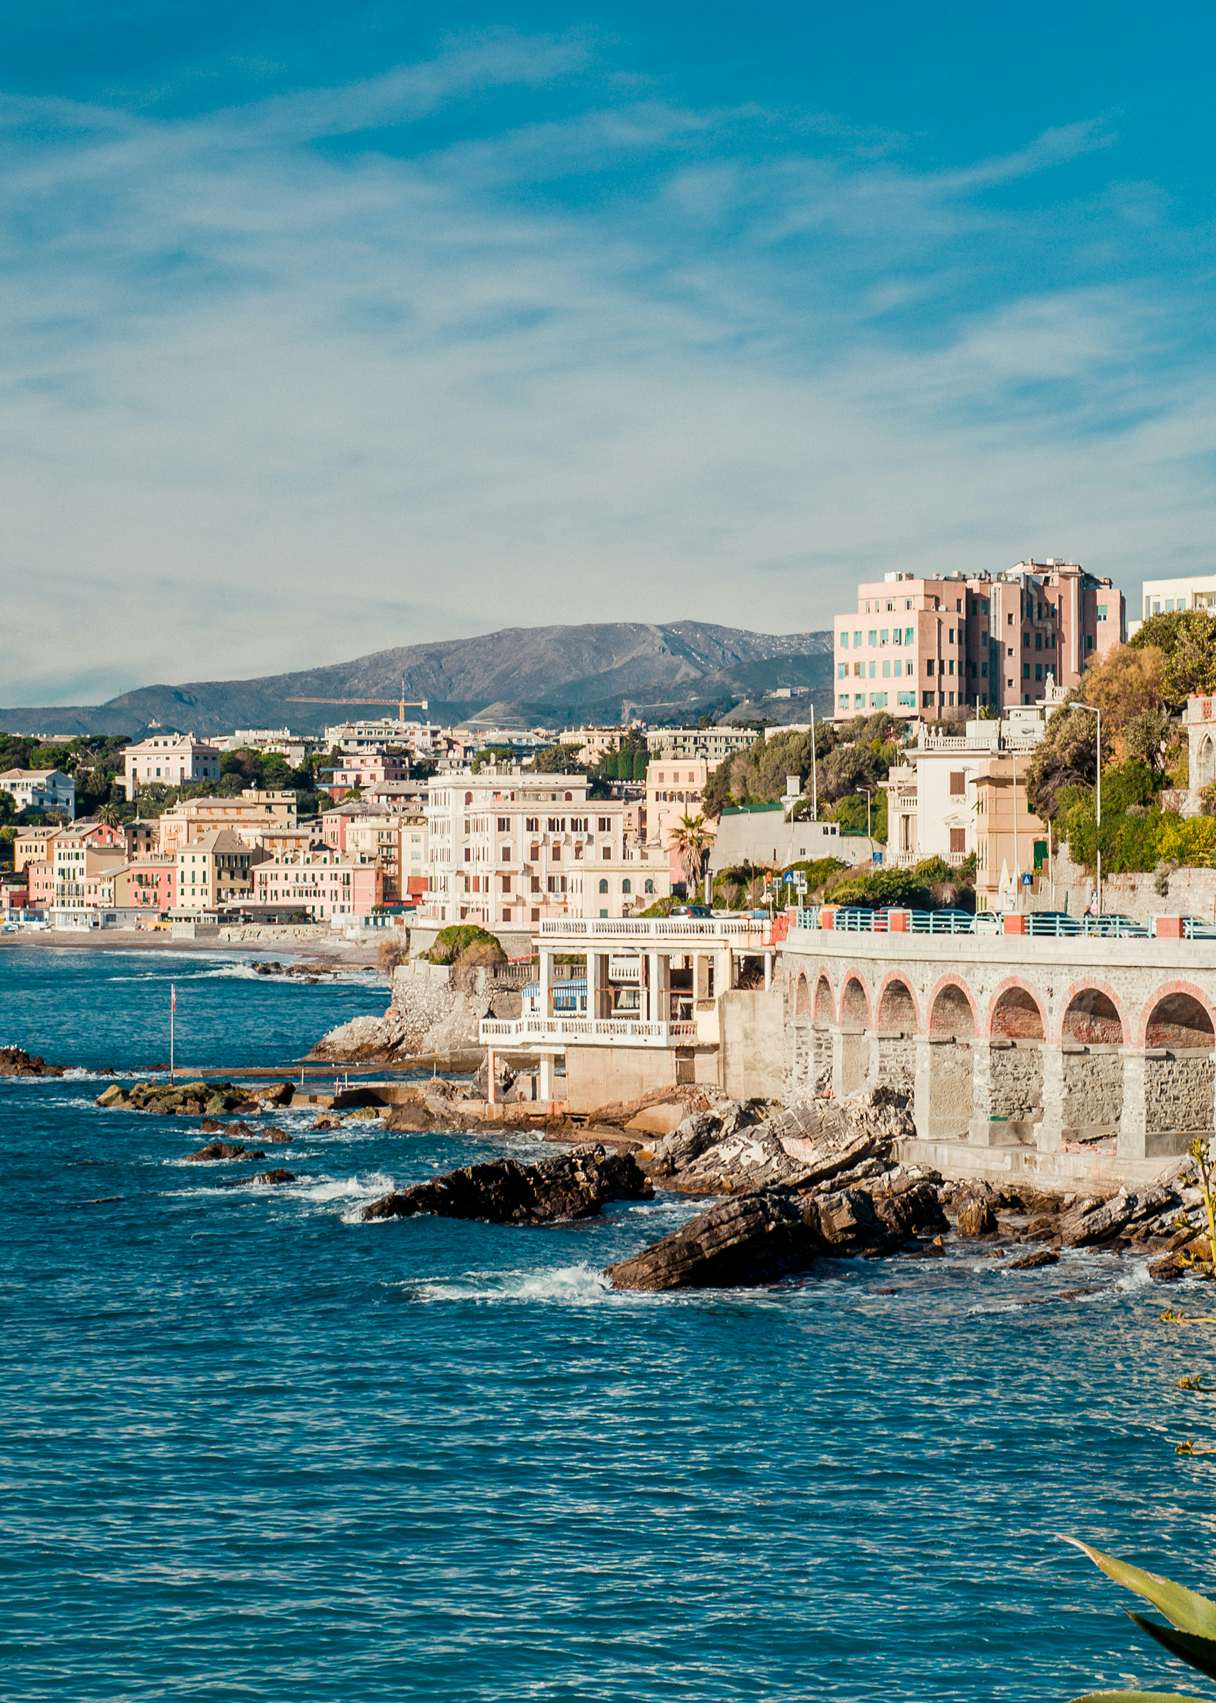 The historic waterfront of Genoa, with its renowned architecture, as seen from the Italian Riviera yacht route.